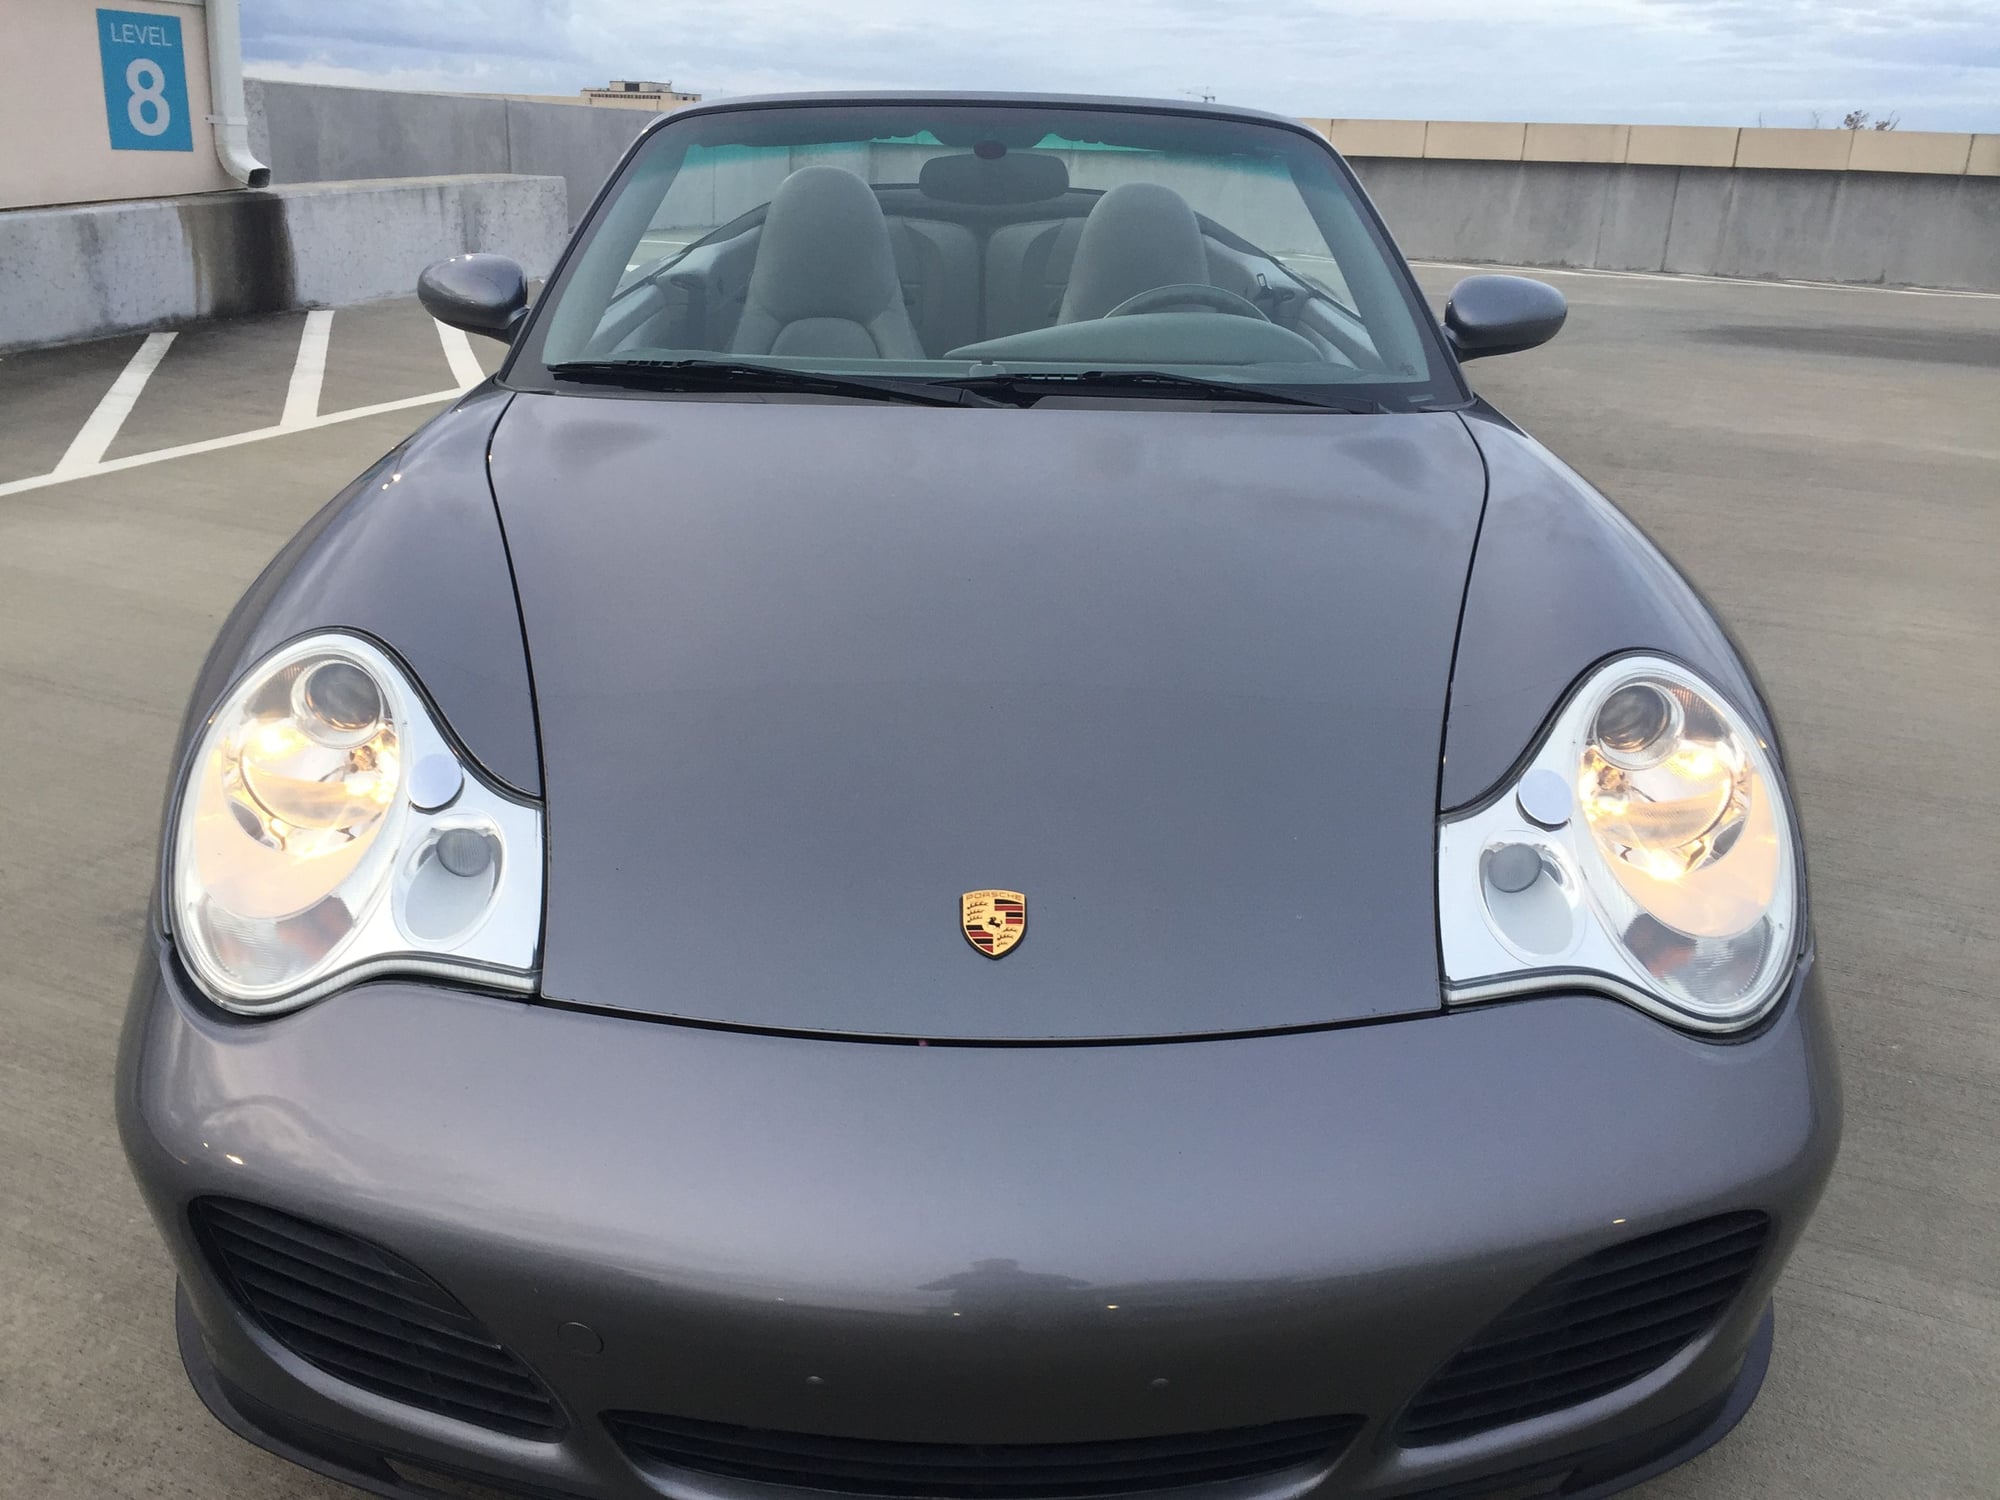 2004 Porsche 911 - 2004 996TT Cabriolet Tiptronic - Used - VIN WP0CB29944S676370 - 46,300 Miles - 6 cyl - AWD - Automatic - Convertible - Gray - Charleston, SC 29407, United States